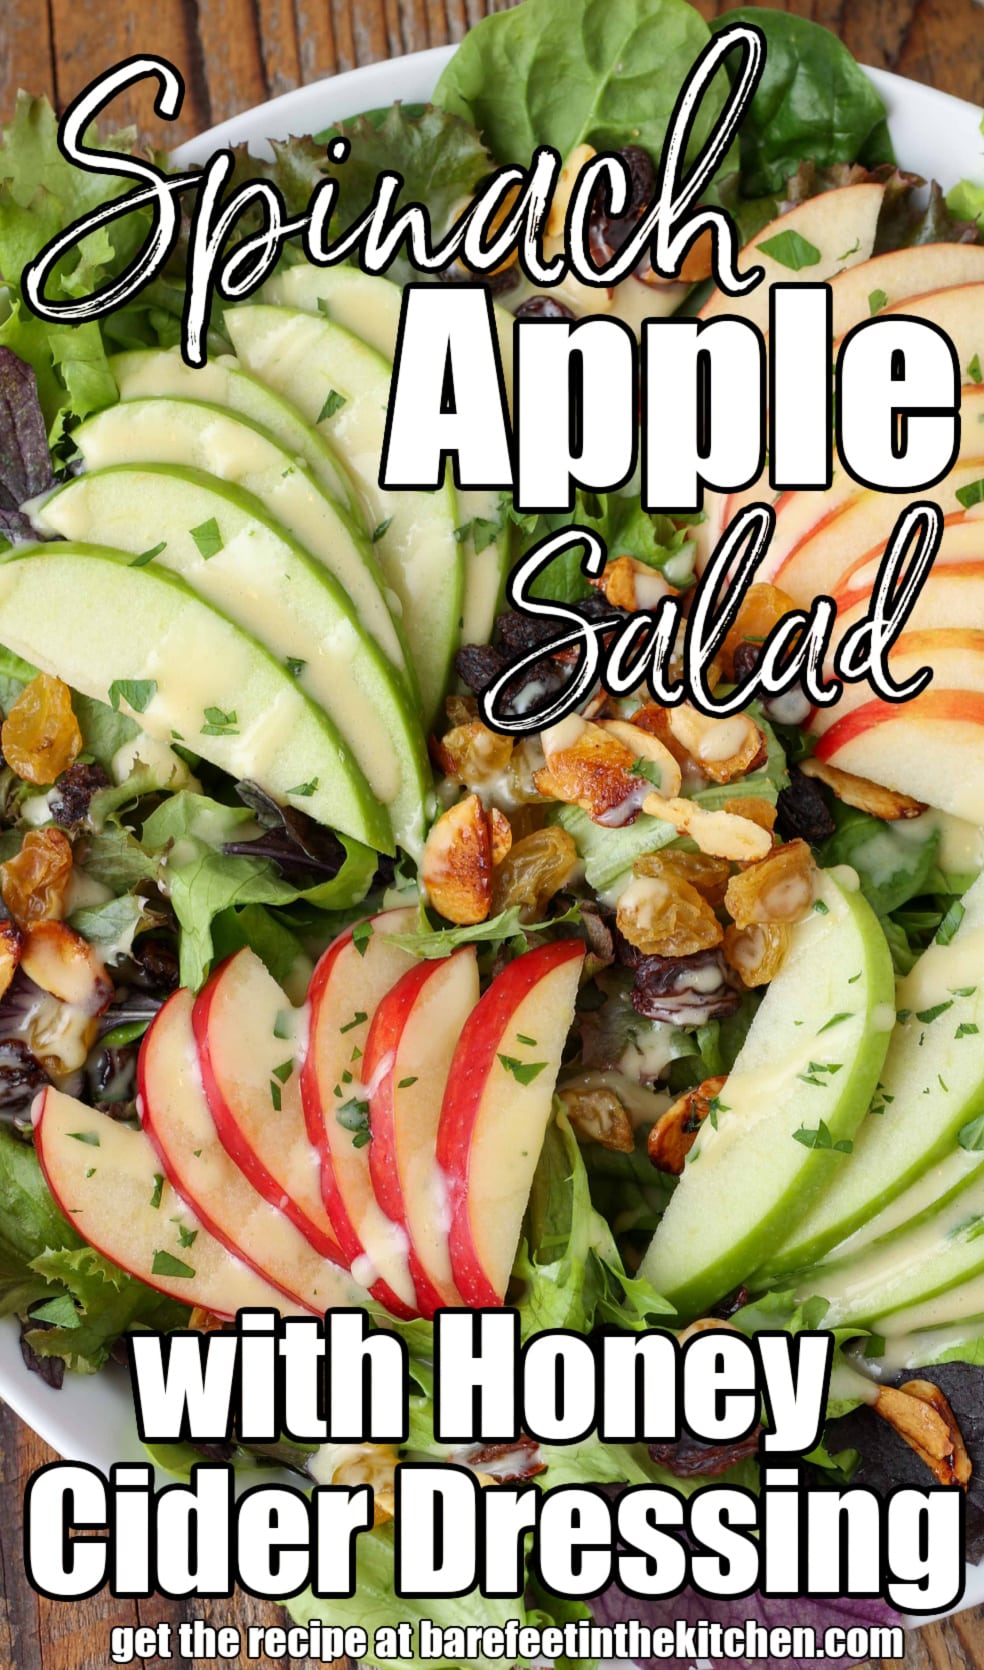 Spinach Apple Salad with Honey Cider Dressing